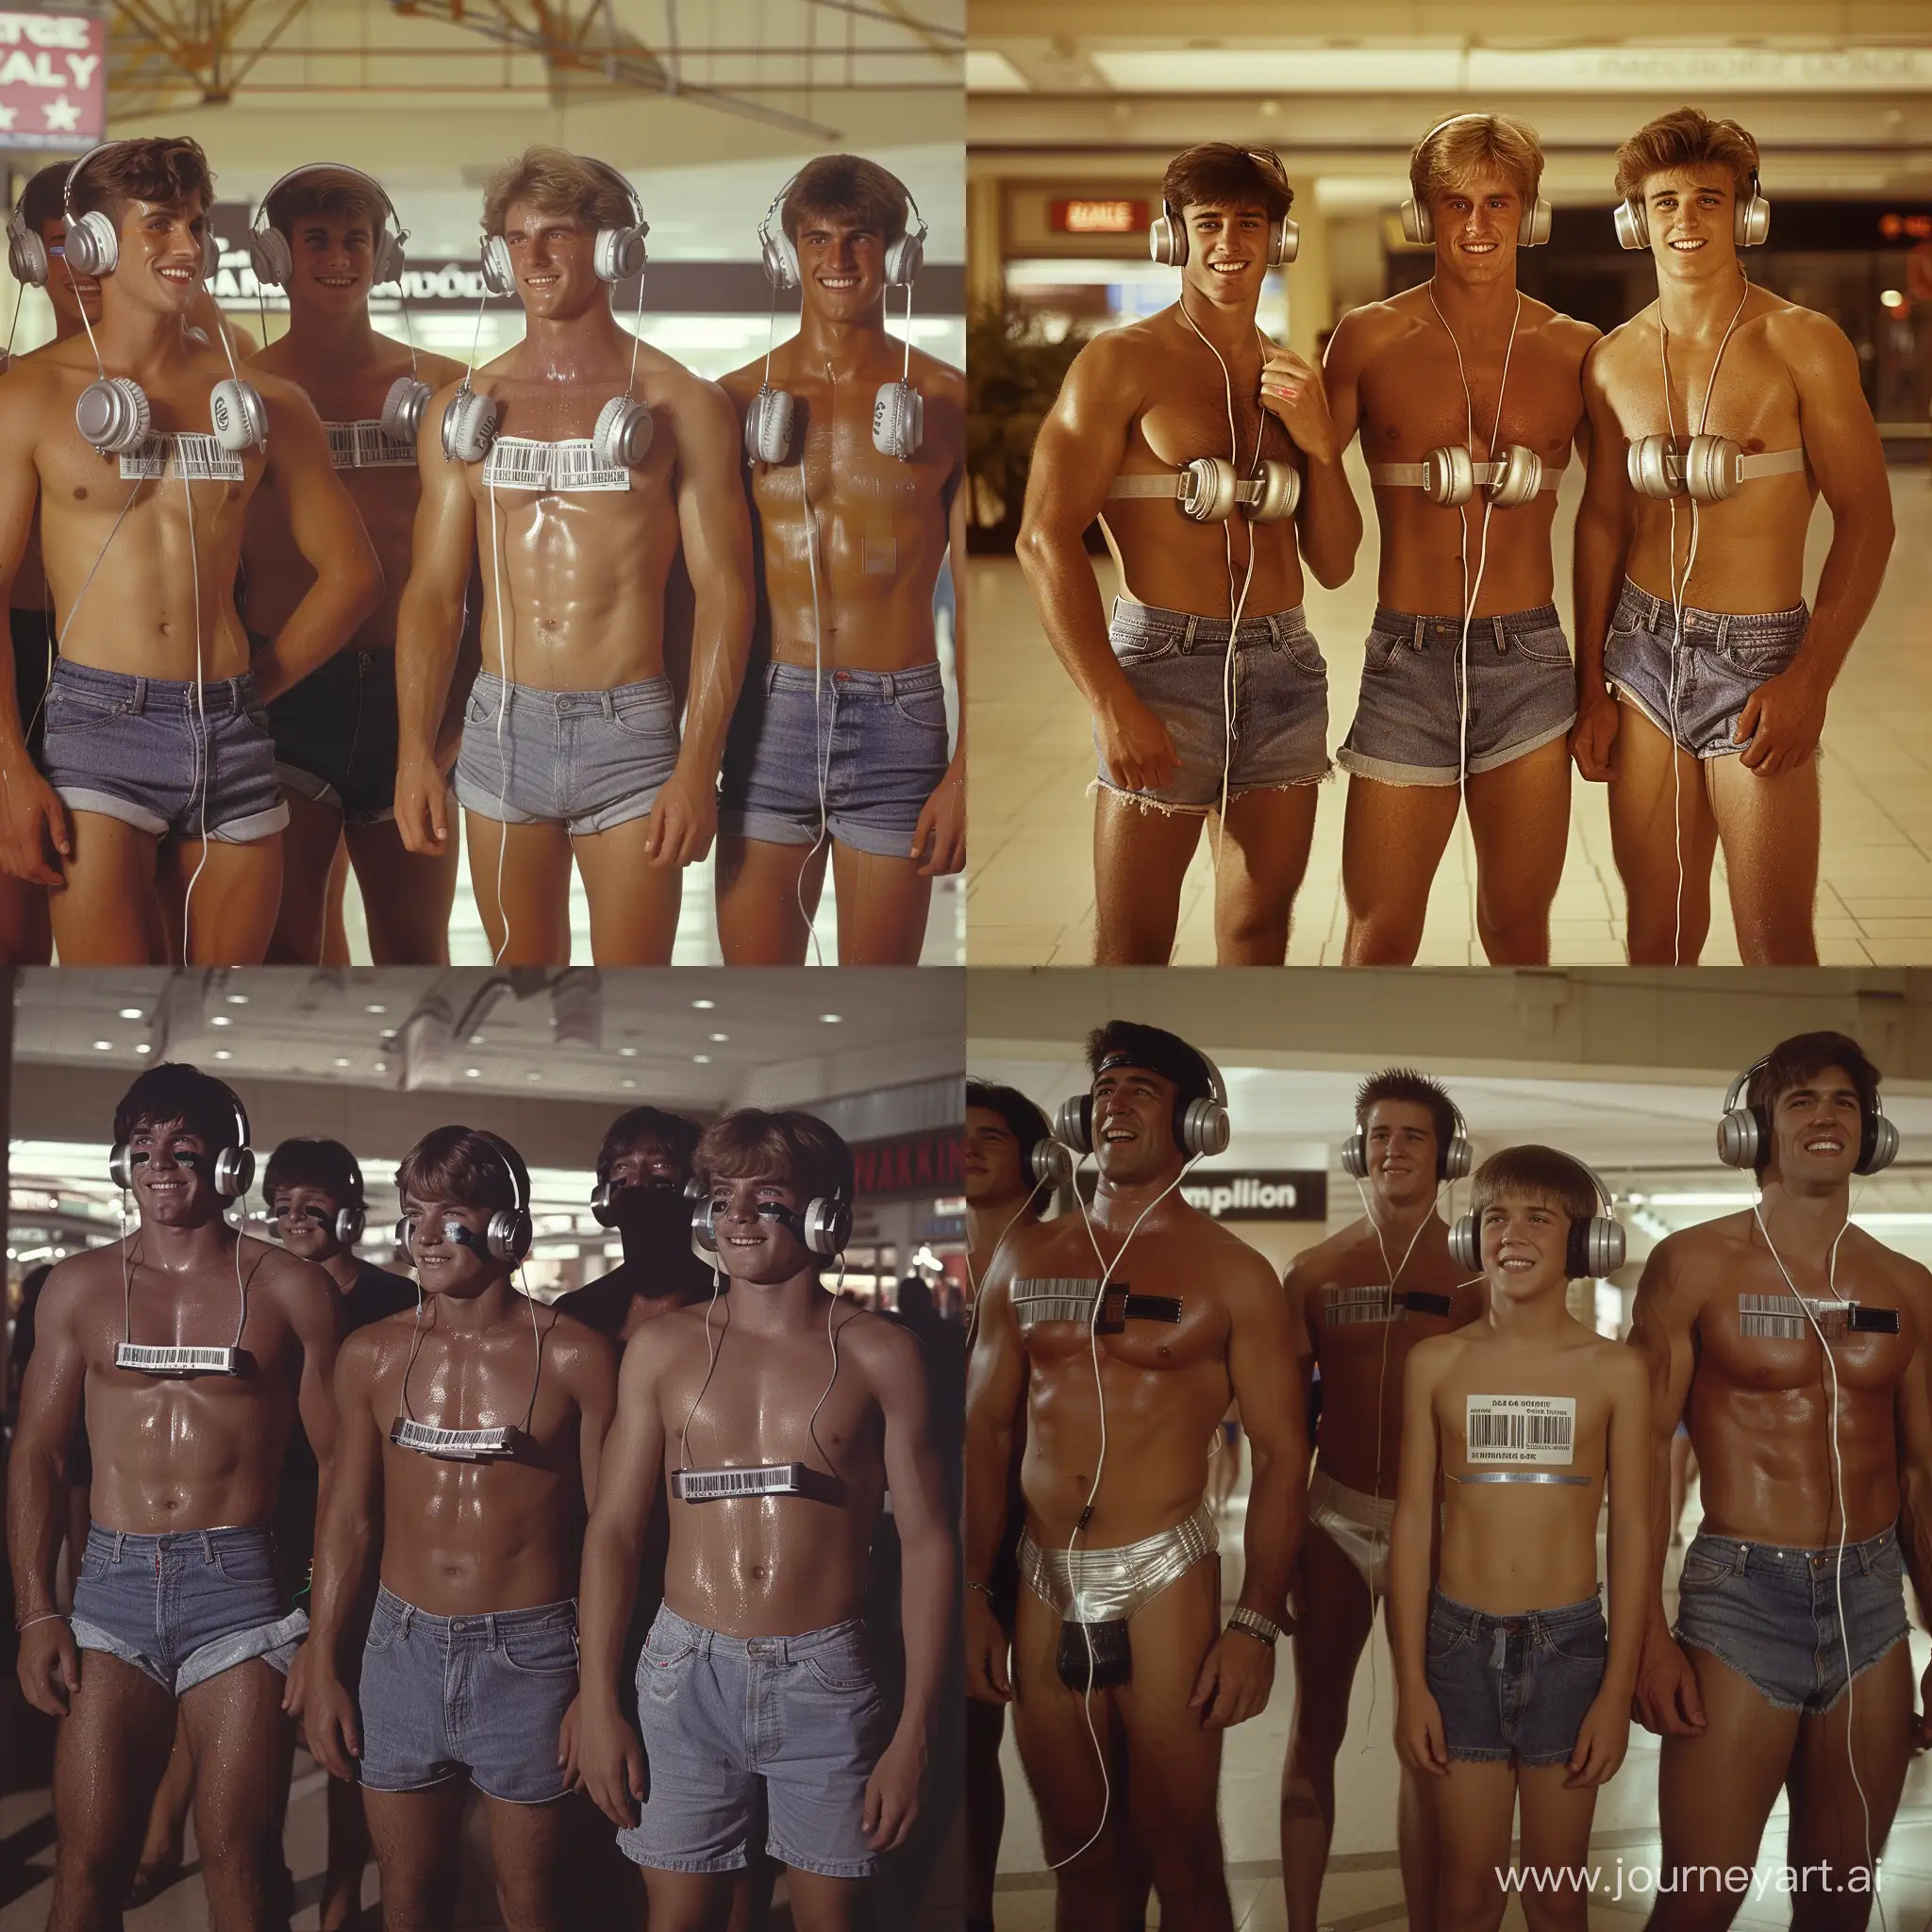 Handsome muscular middle-aged men and handsome muscular college-age boys each wear silver headphones and fitted denim cutoff shorts, dazed smiles, small barcode attached to each man's chest, 1980s shopping mall setting, facing the viewer, mass indoctrination, color image, hyperrealistic, cinematic

